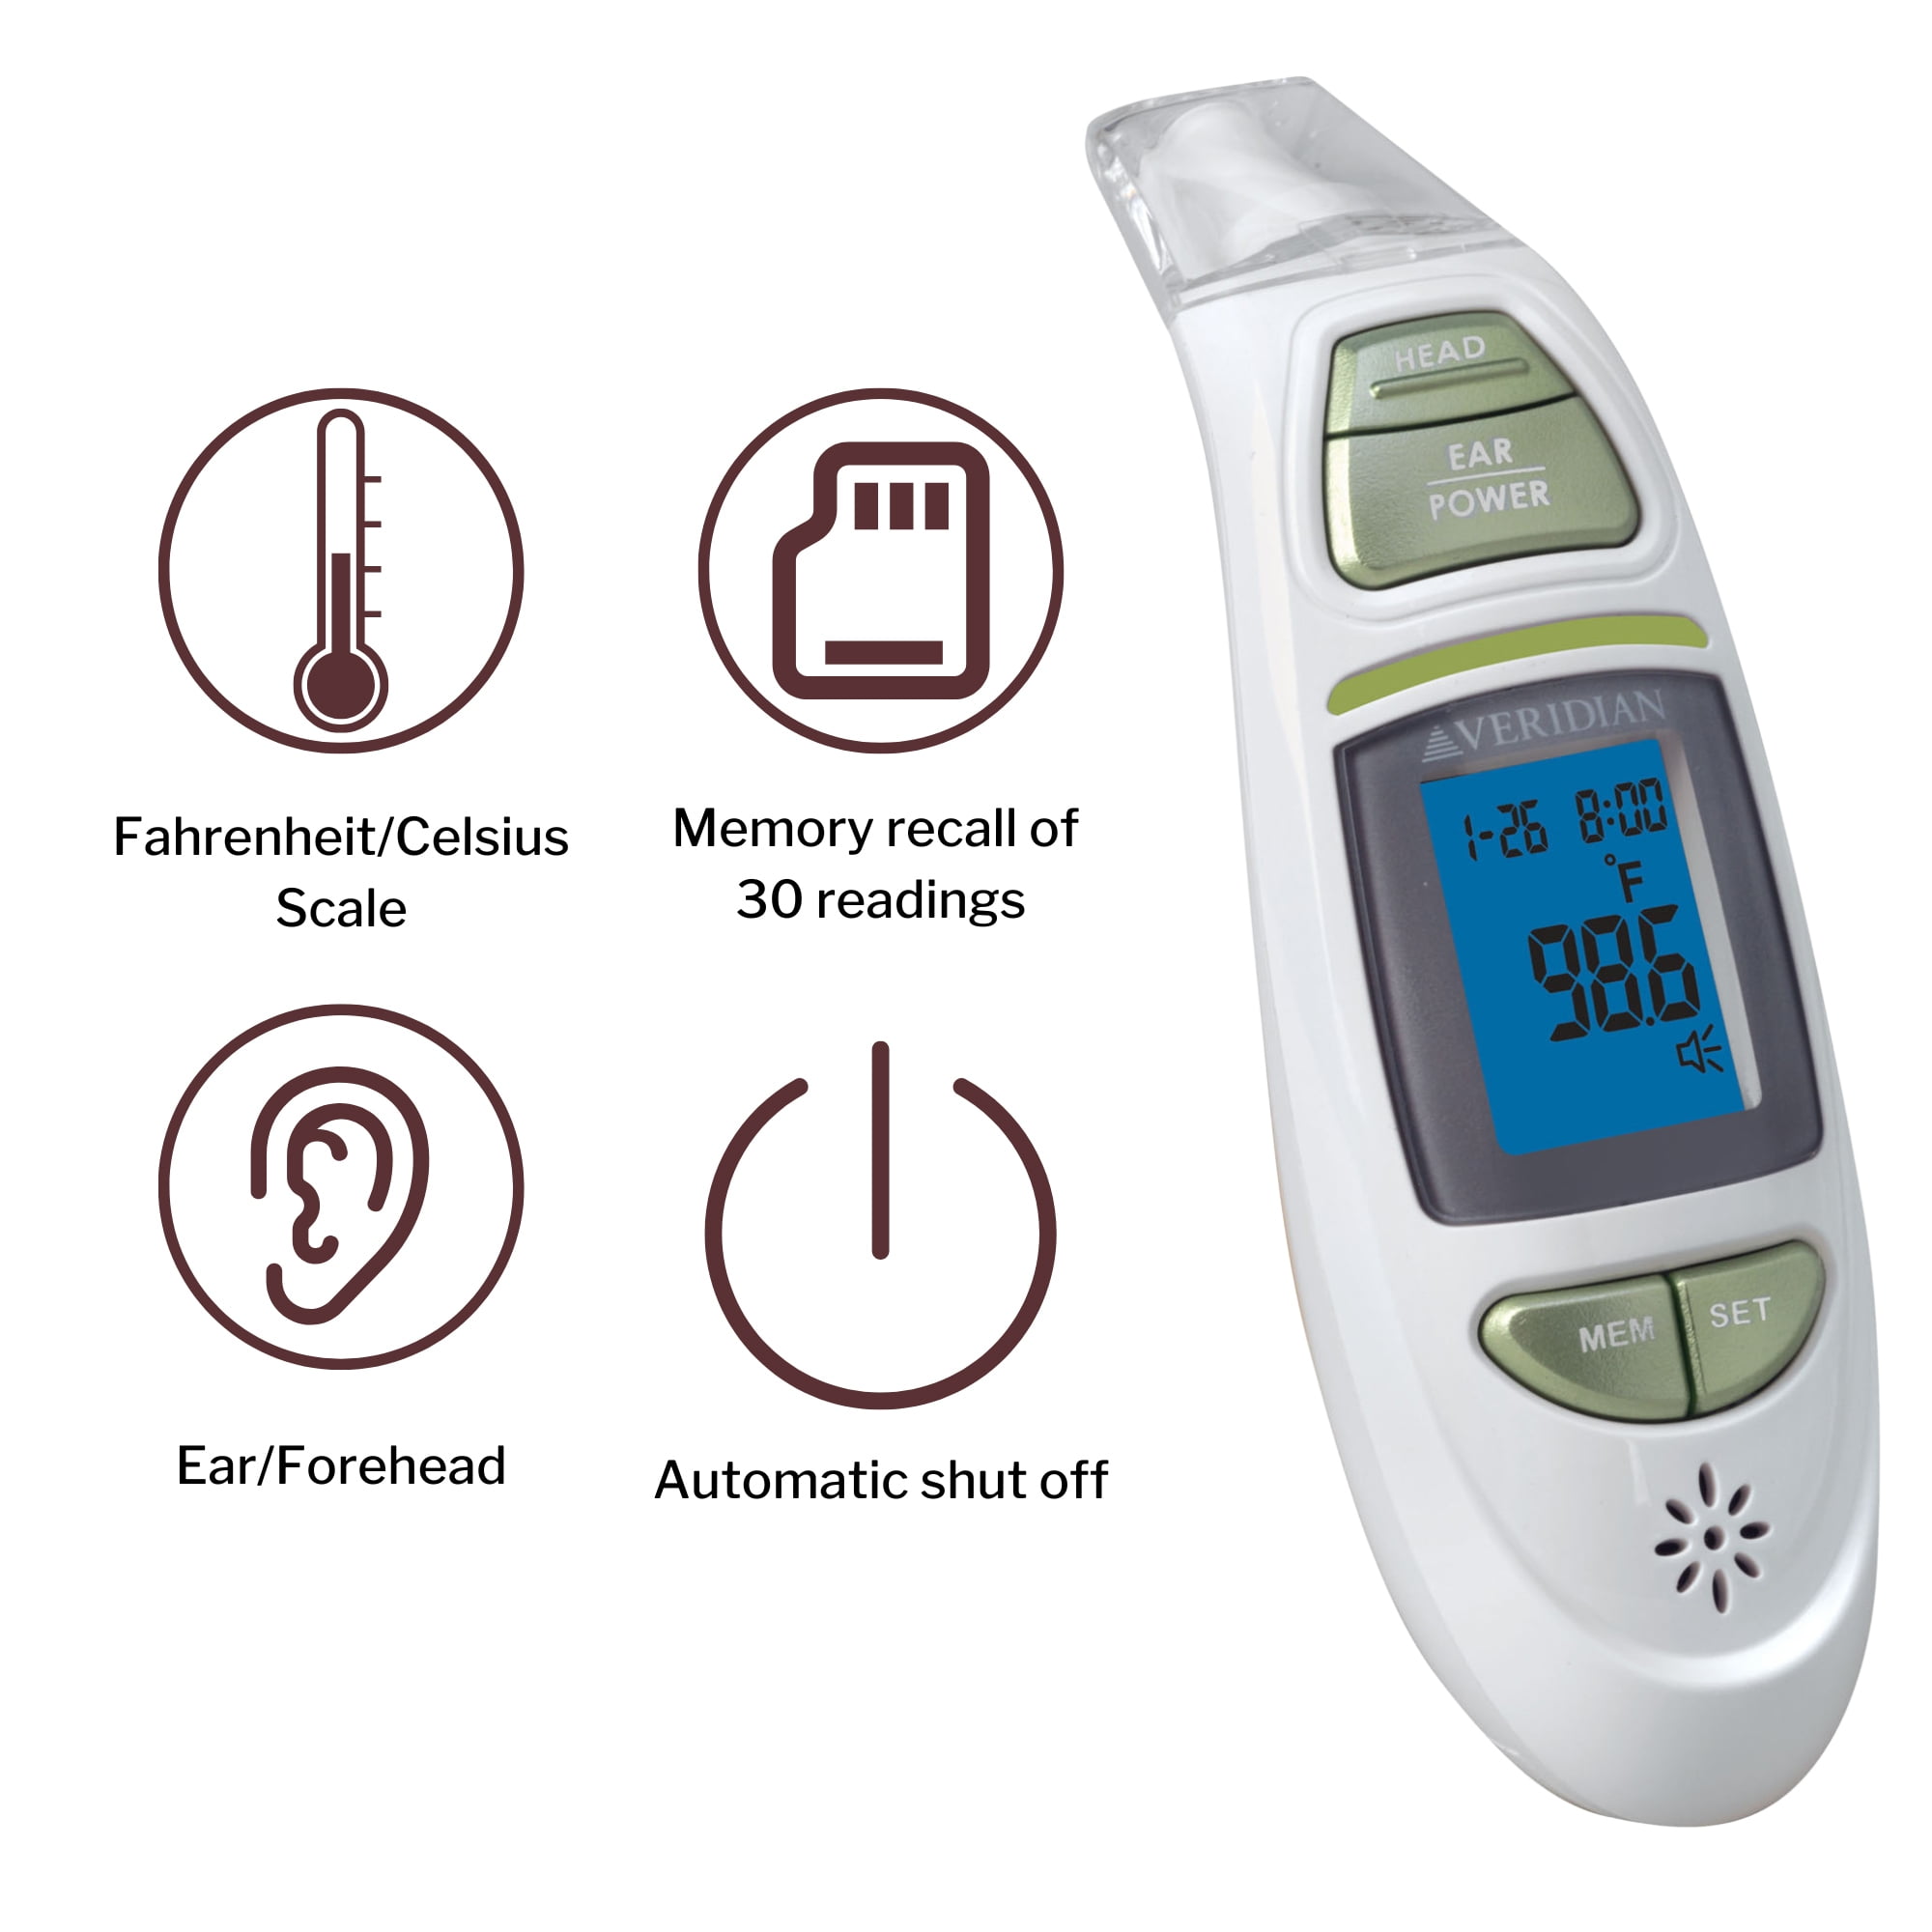 Talking Ear & Forehead Infrared Thermometer 09-342 by Veridian